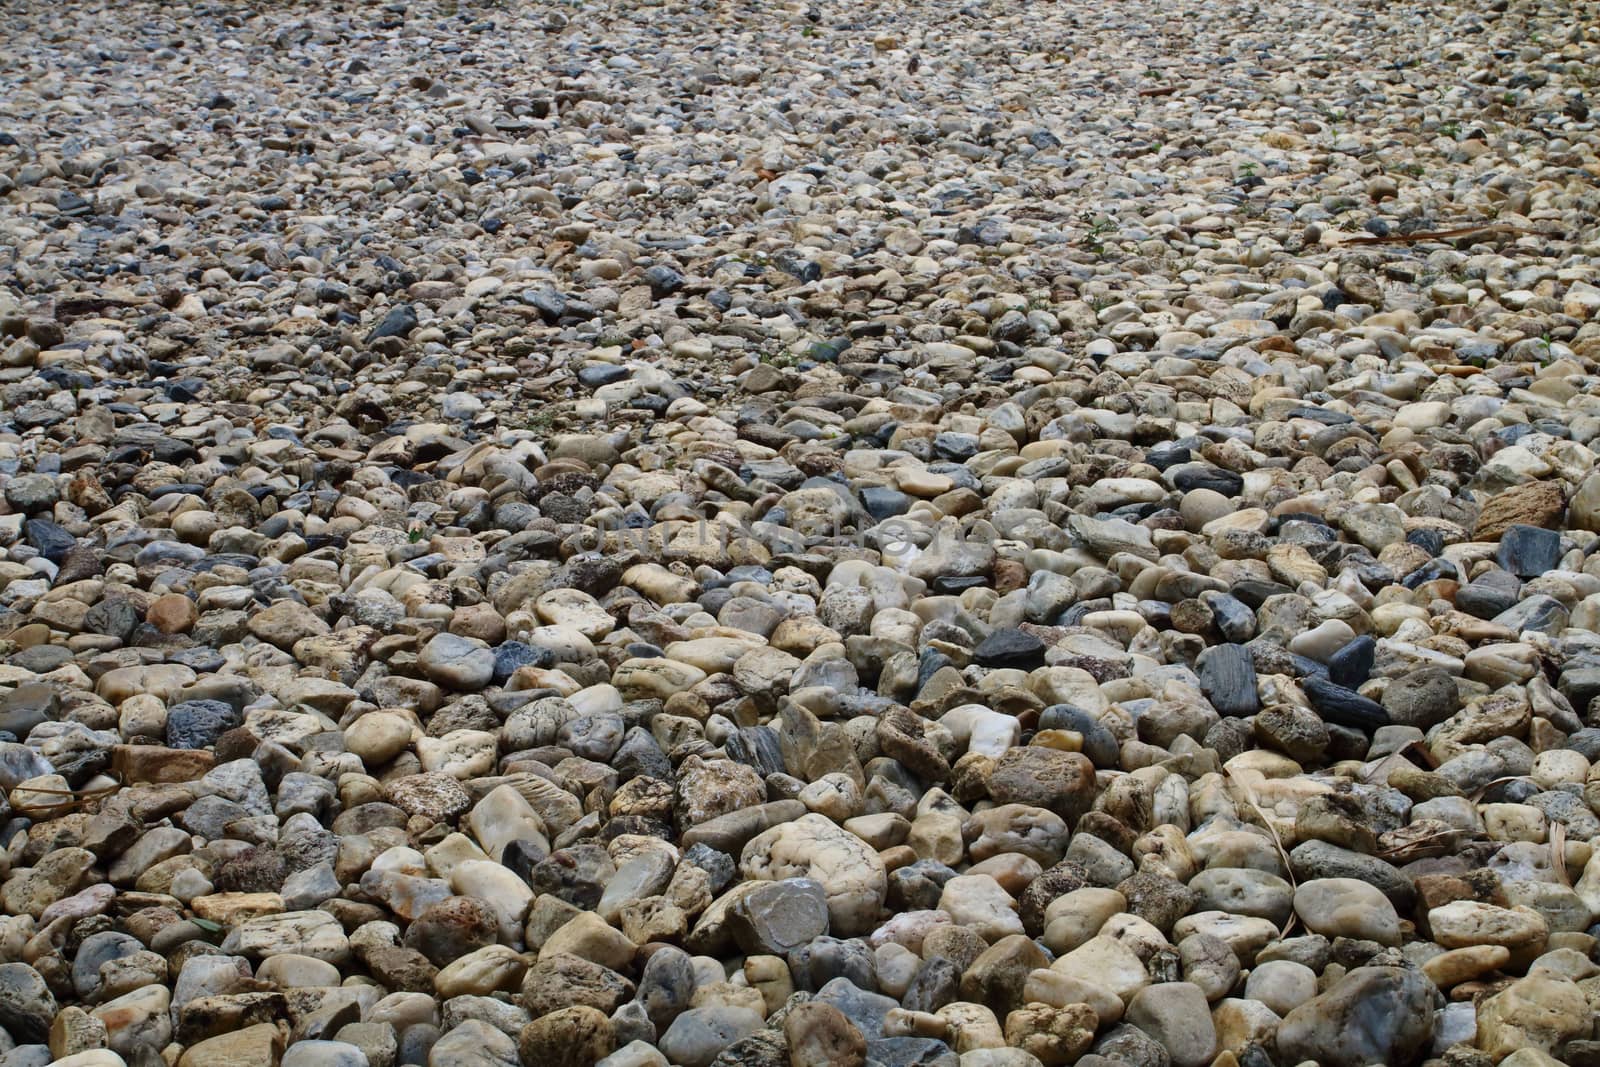 The area is full of stones and pebble.